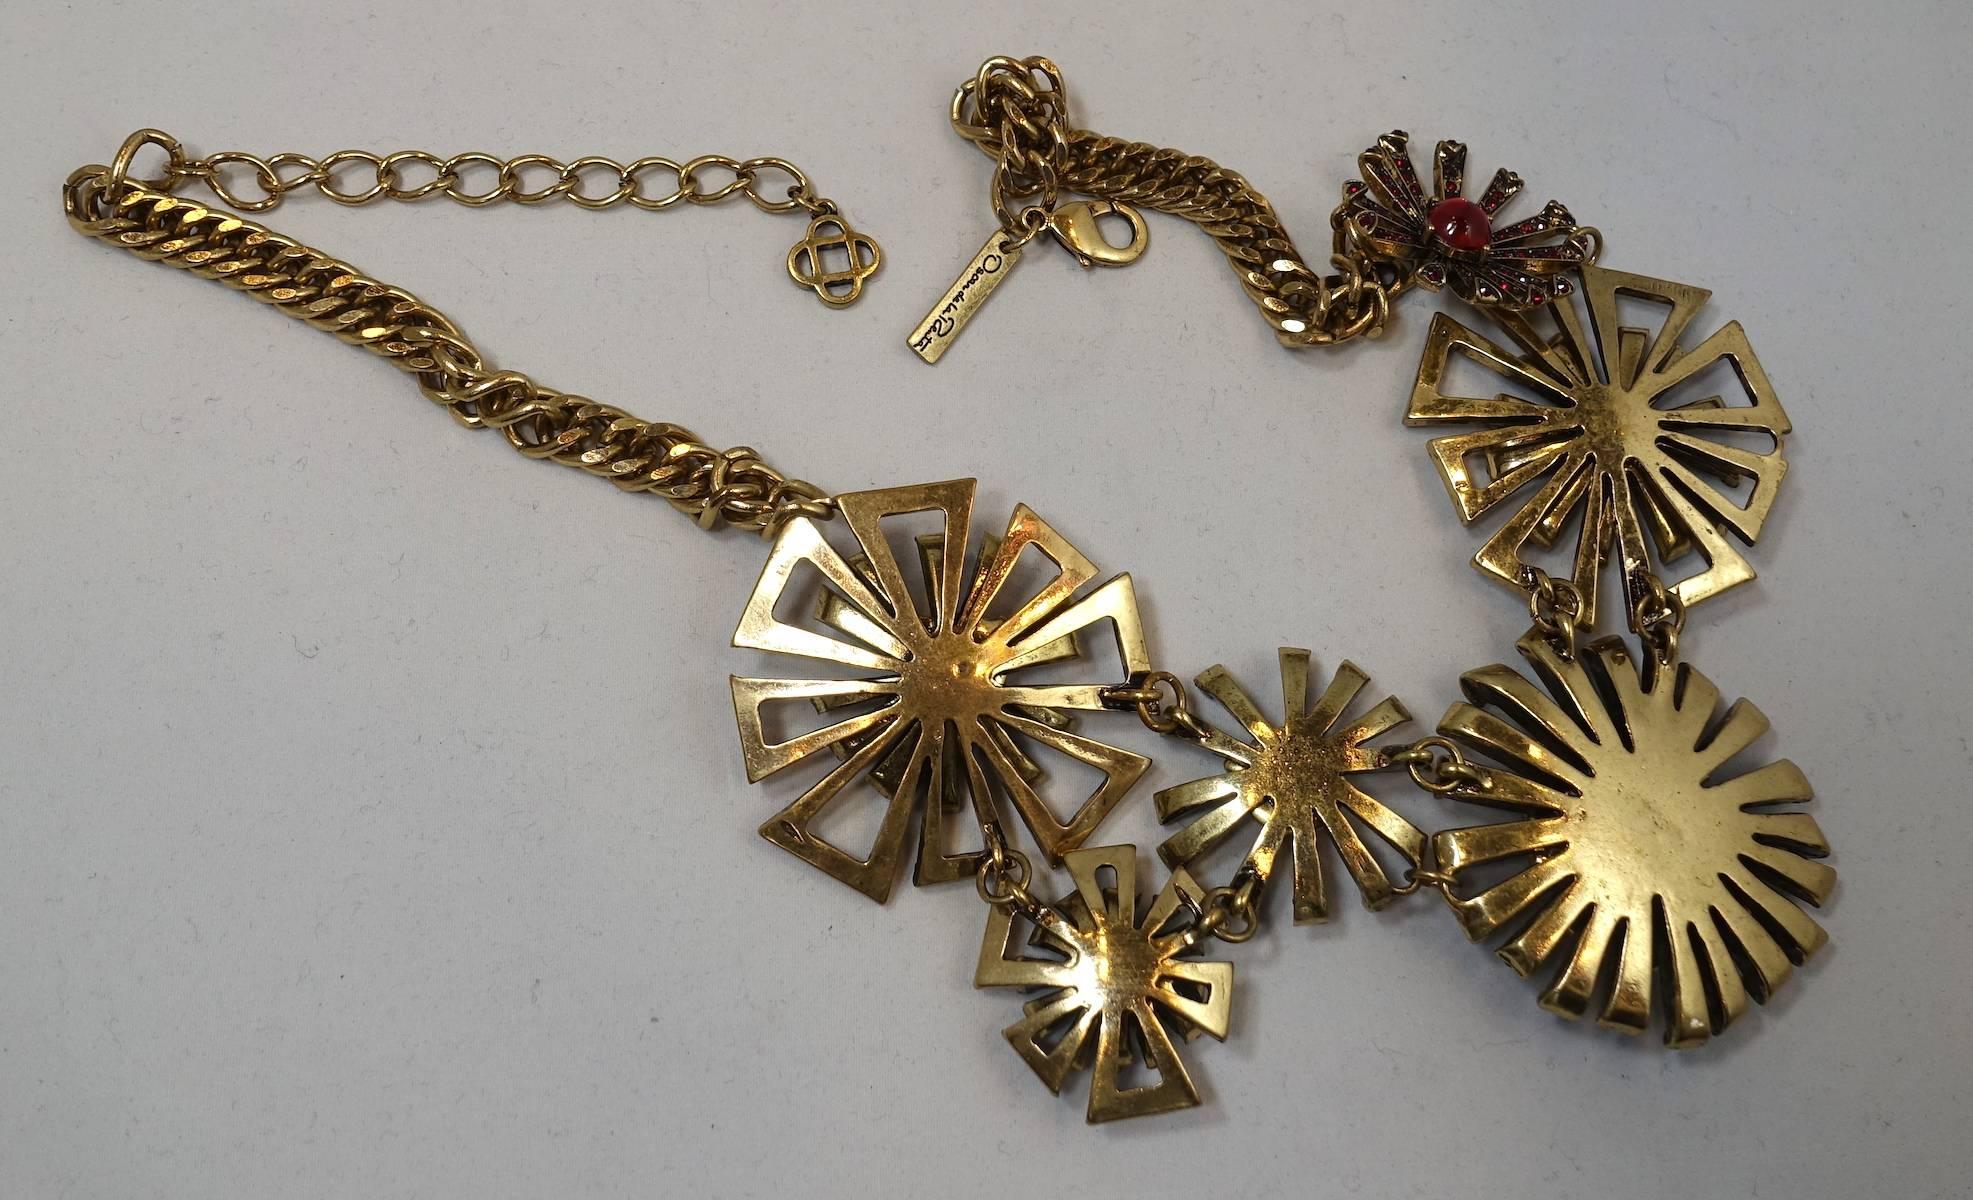 This Oscar De La Renta necklace has six abstract starbursts with rose color crystals. It’s in a gold tone setting and has a lobster clasp. It is connected with a heavy chain and then an open link chain to make sizing adjustable.  The centerpiece is